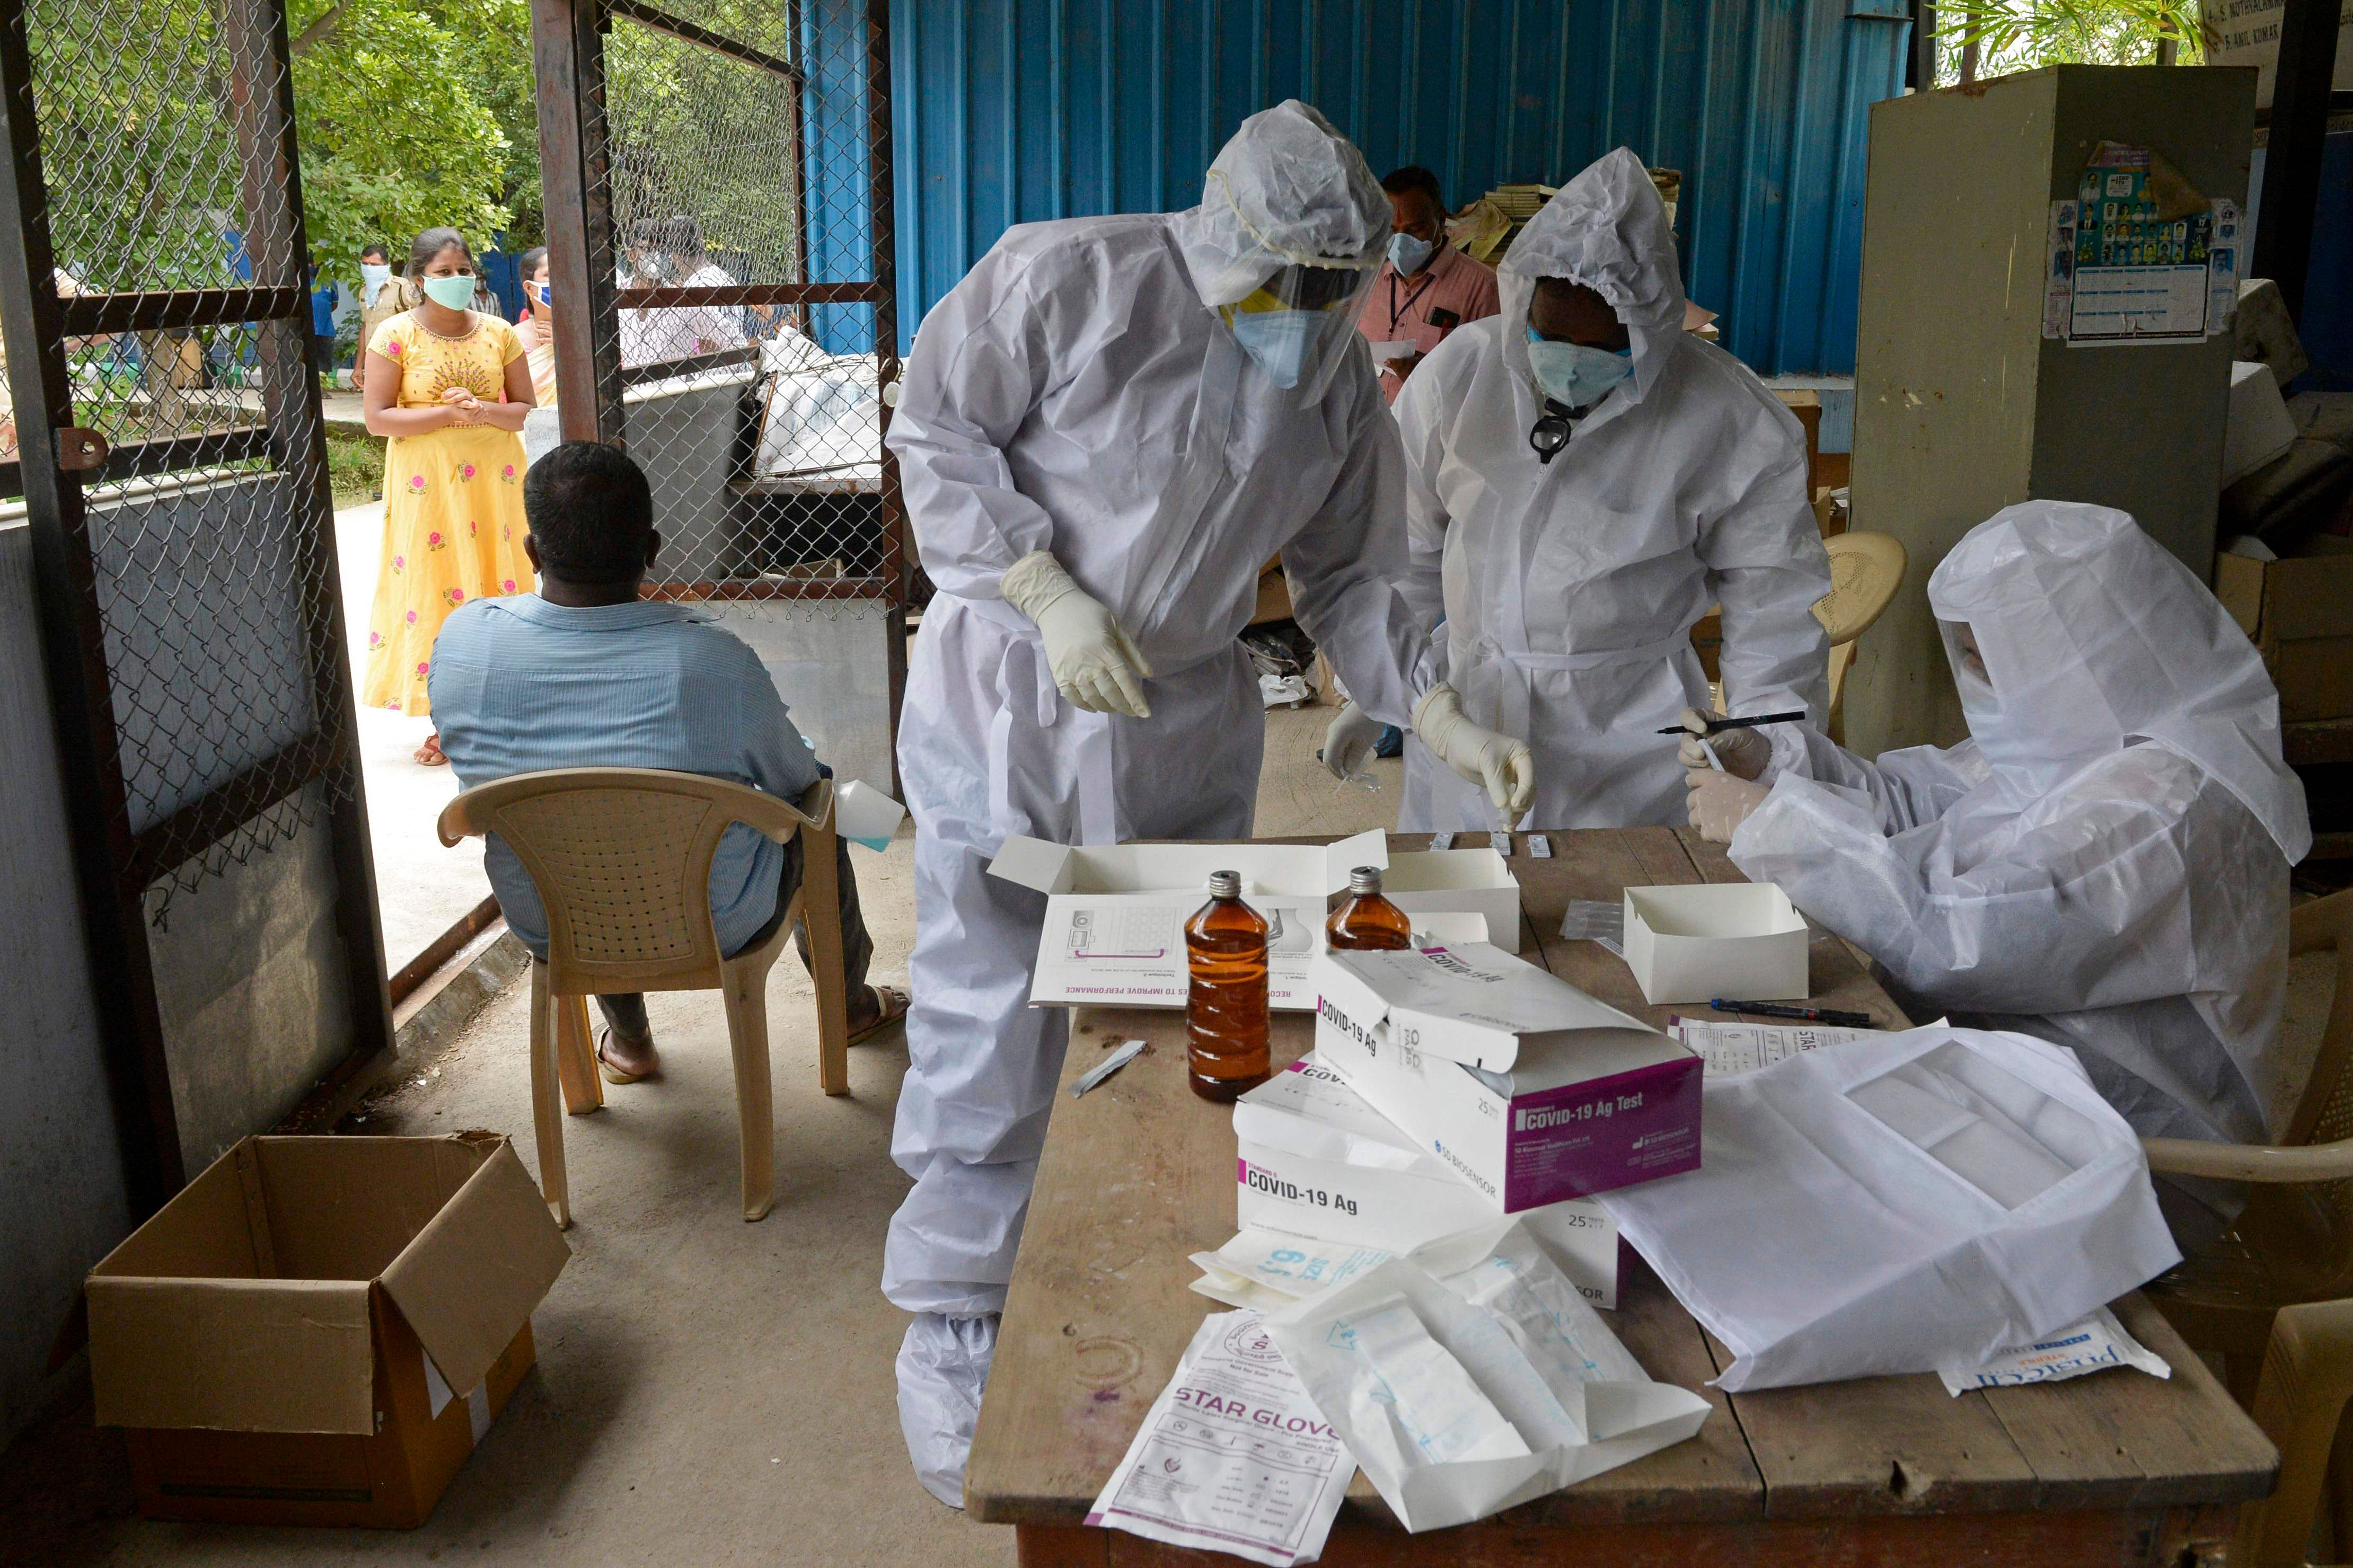 Health workers wearing Personal Protective Equipment (PPE) gear prepare to collect swab samples of residents at a free testing centre for the COVID-19 coronavirus, at Ranga Reddy district on the outskirts of Hyderabad. Credits: AFP Photo